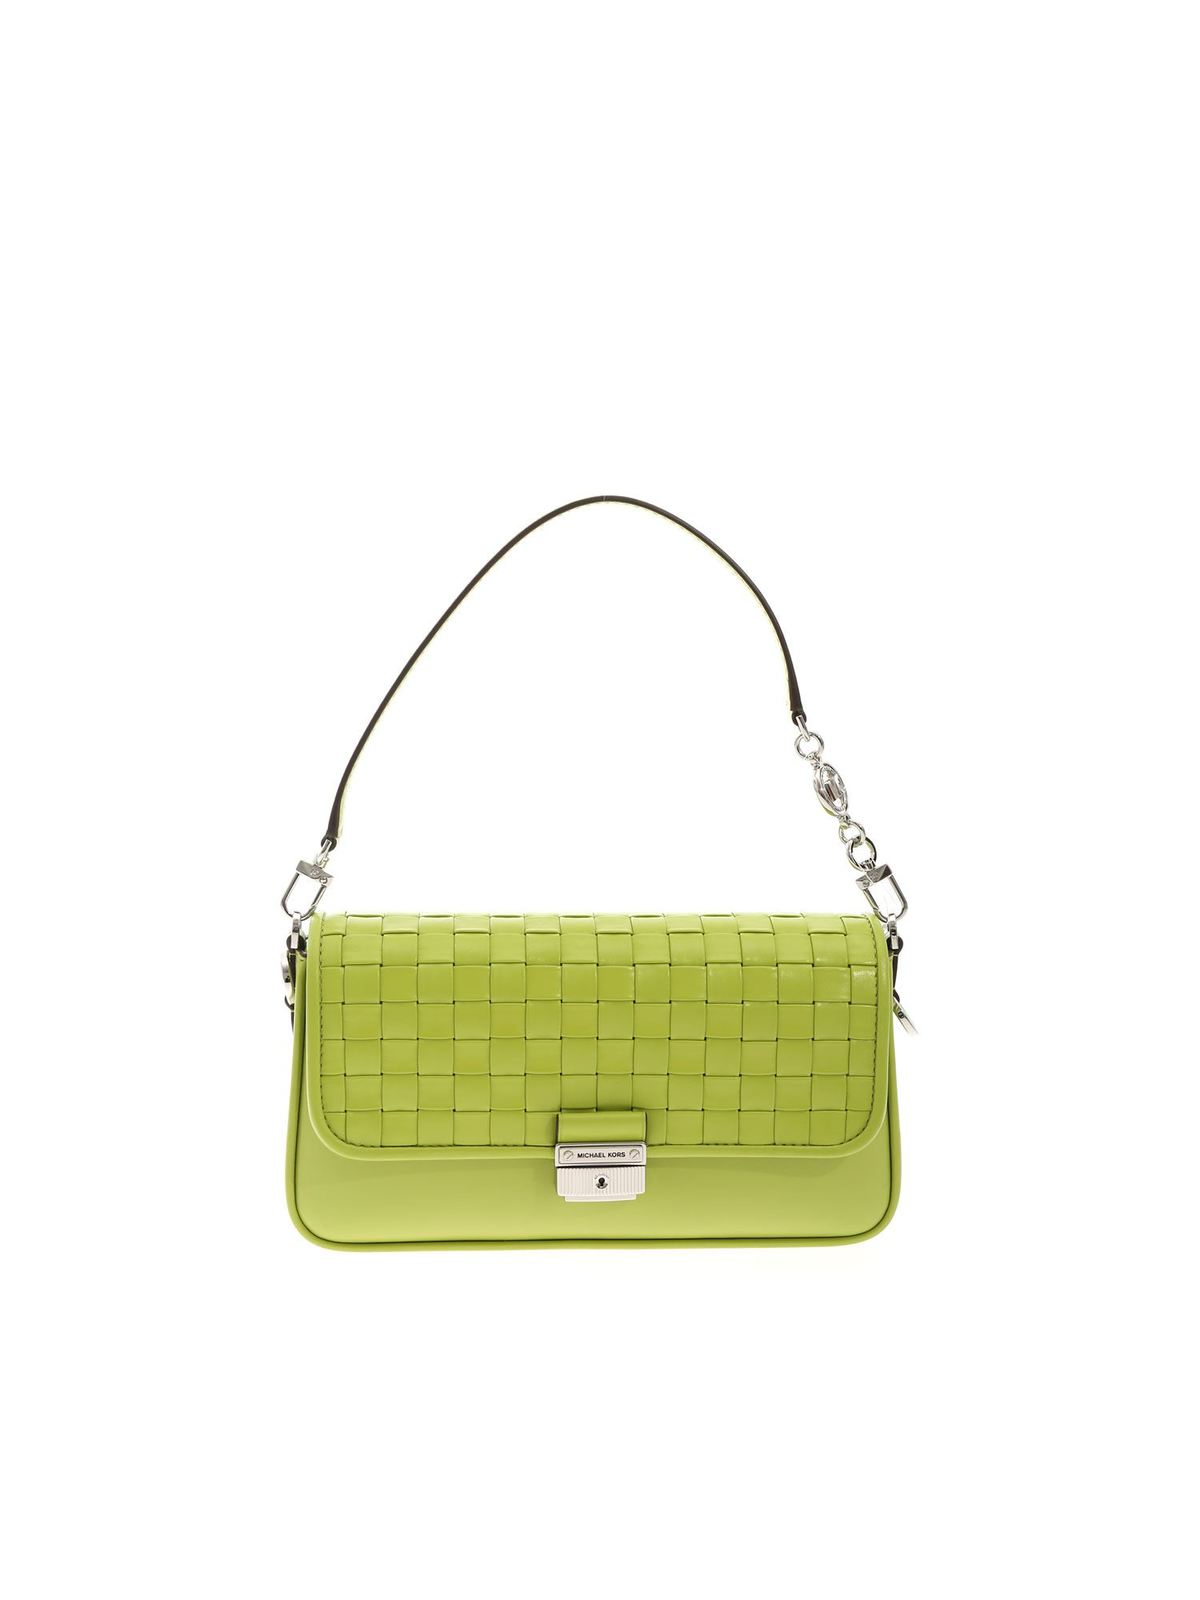 Cross body bags Michael Kors - Braided flap bag in lime green -  30S1S2BL1T763